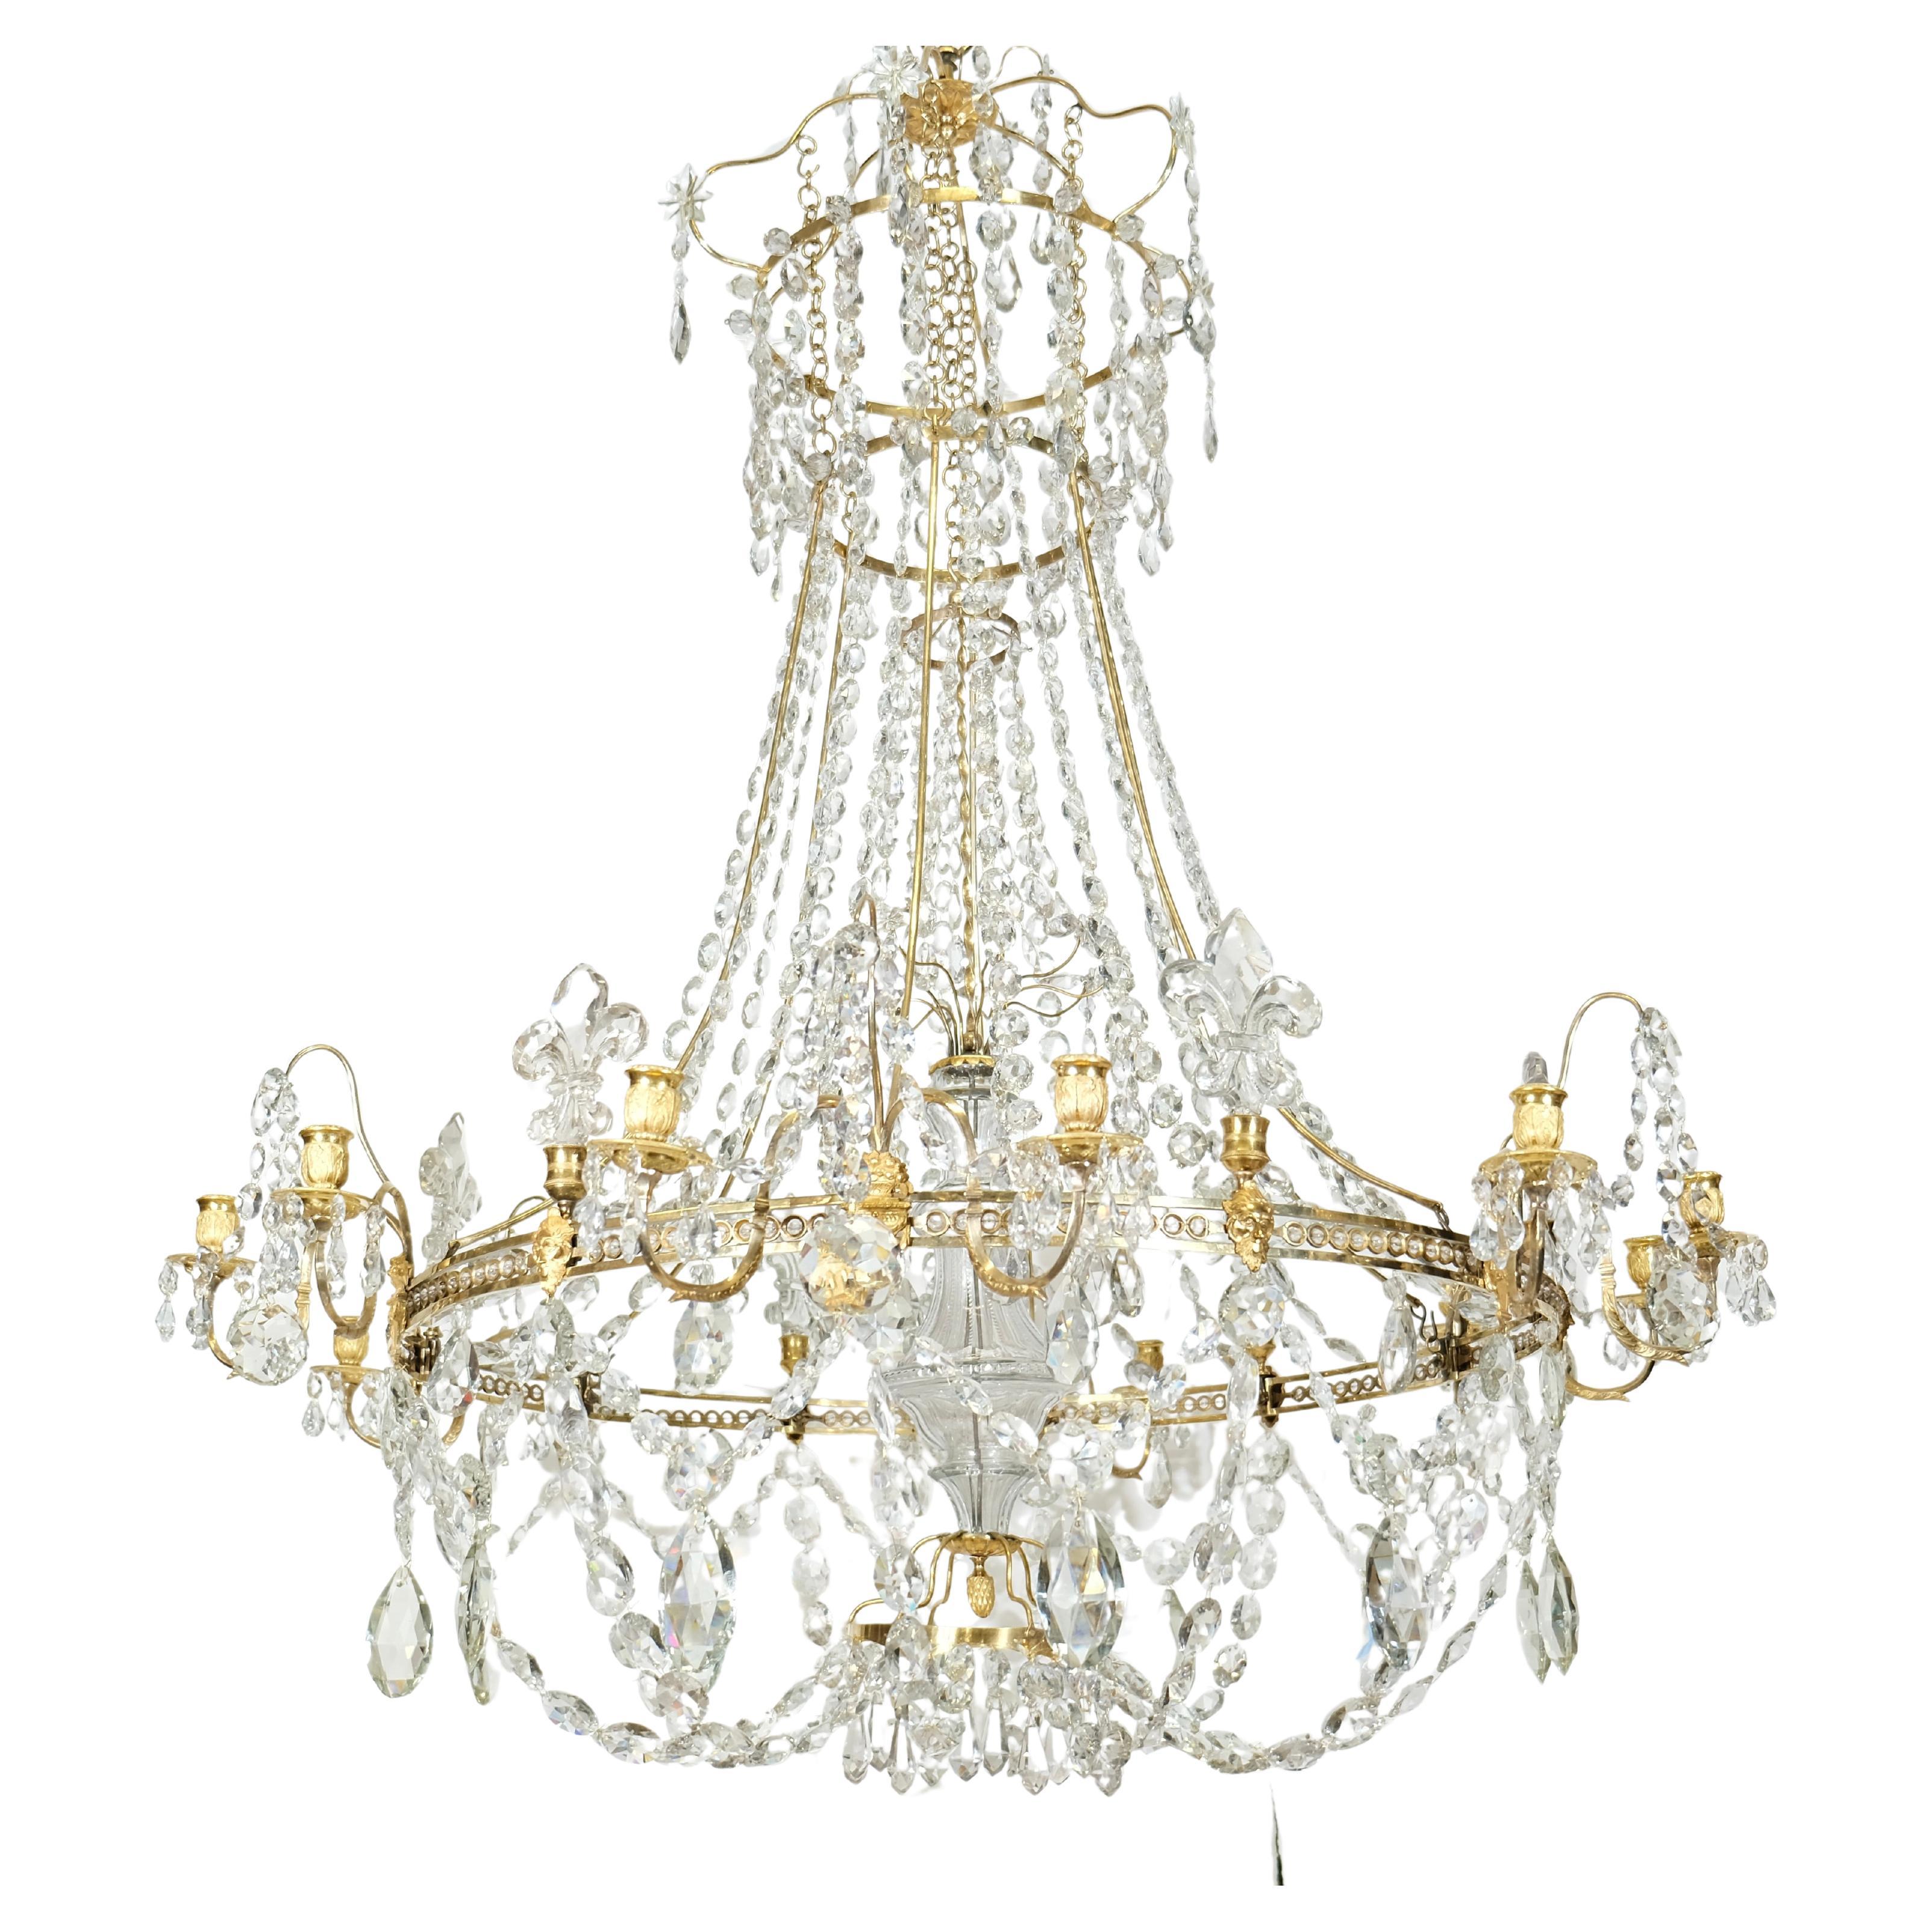 Magnificent Antique Important and large 18th c chandelier For Sale